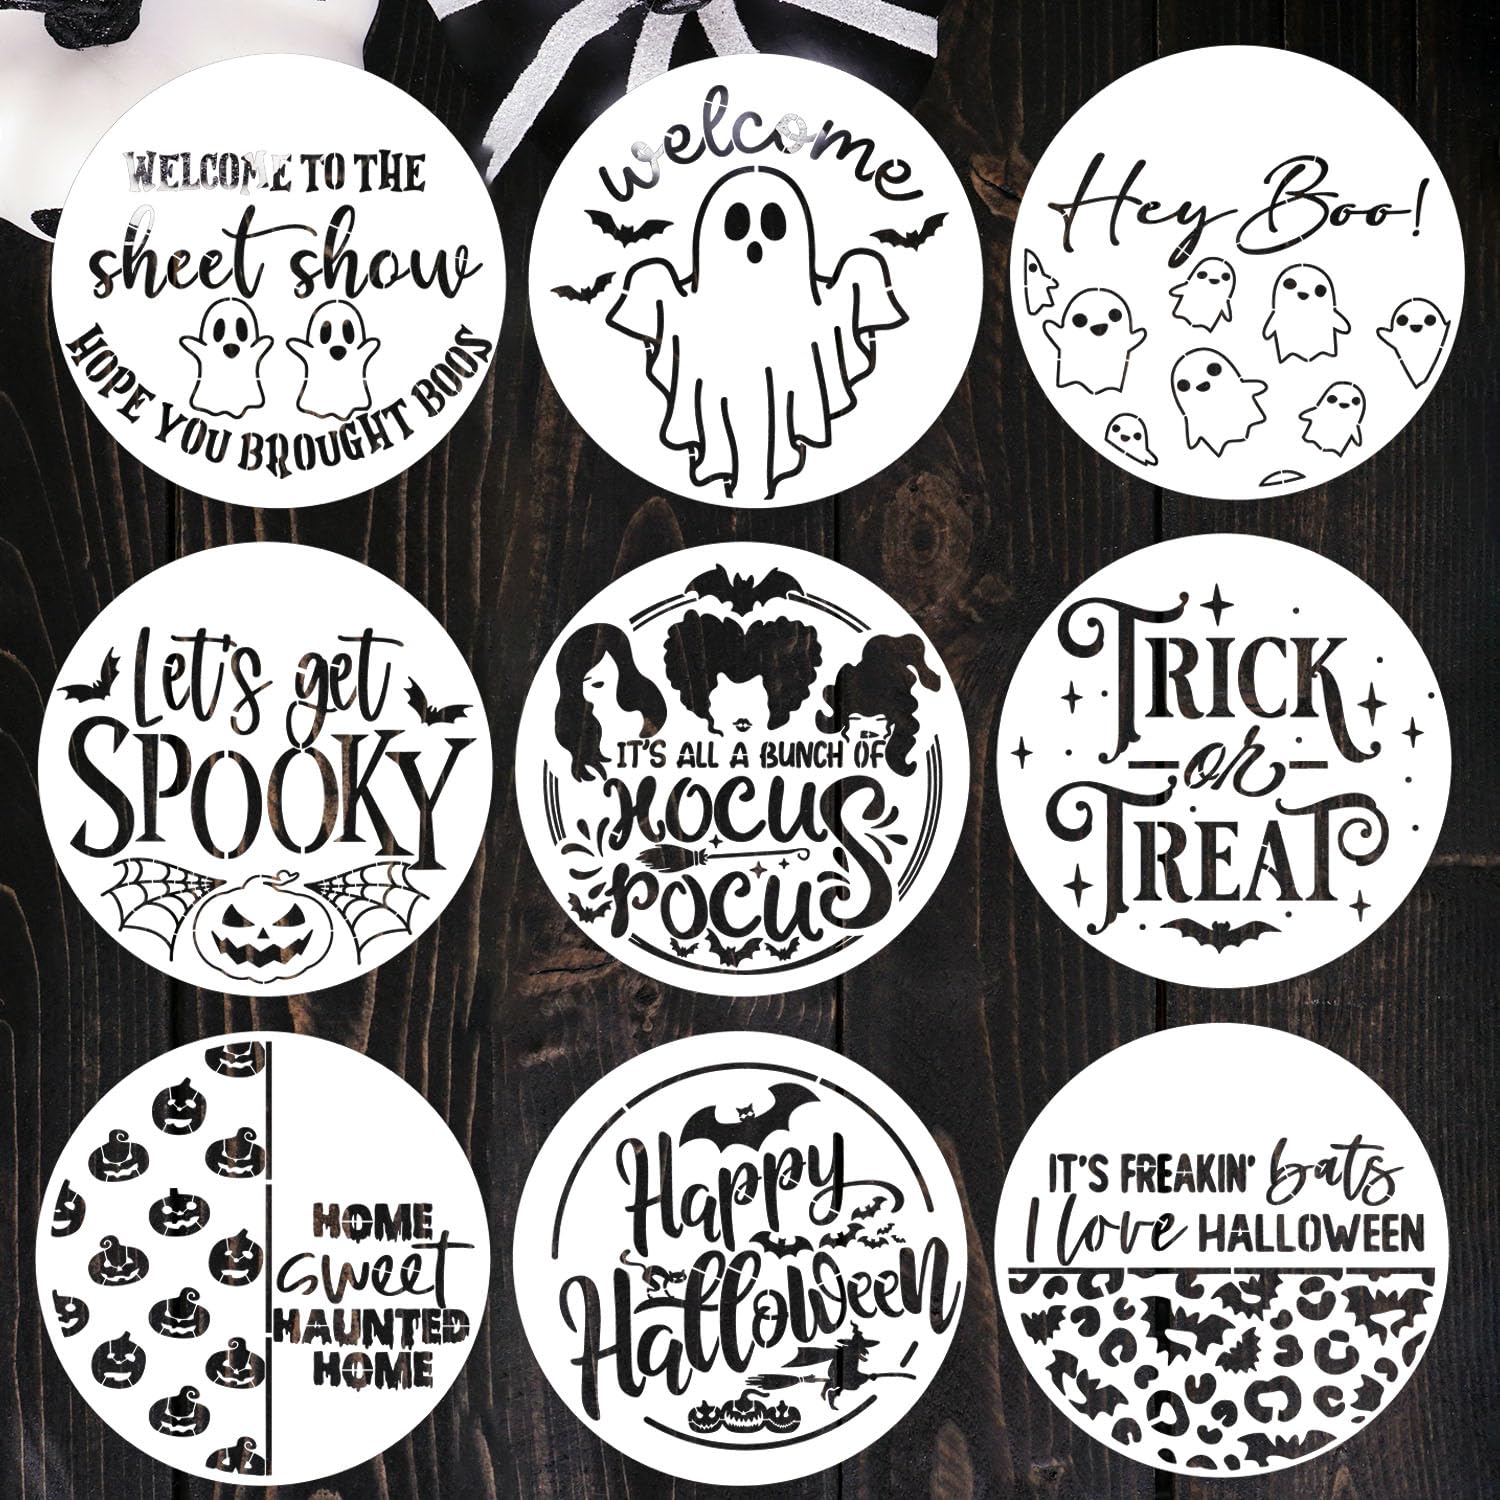 Halloween stencils for painting on wood â round halloween stencil hey boo trick or treat hocus pocus templates for door hanger porch sign shirt painting arts crafts sewing